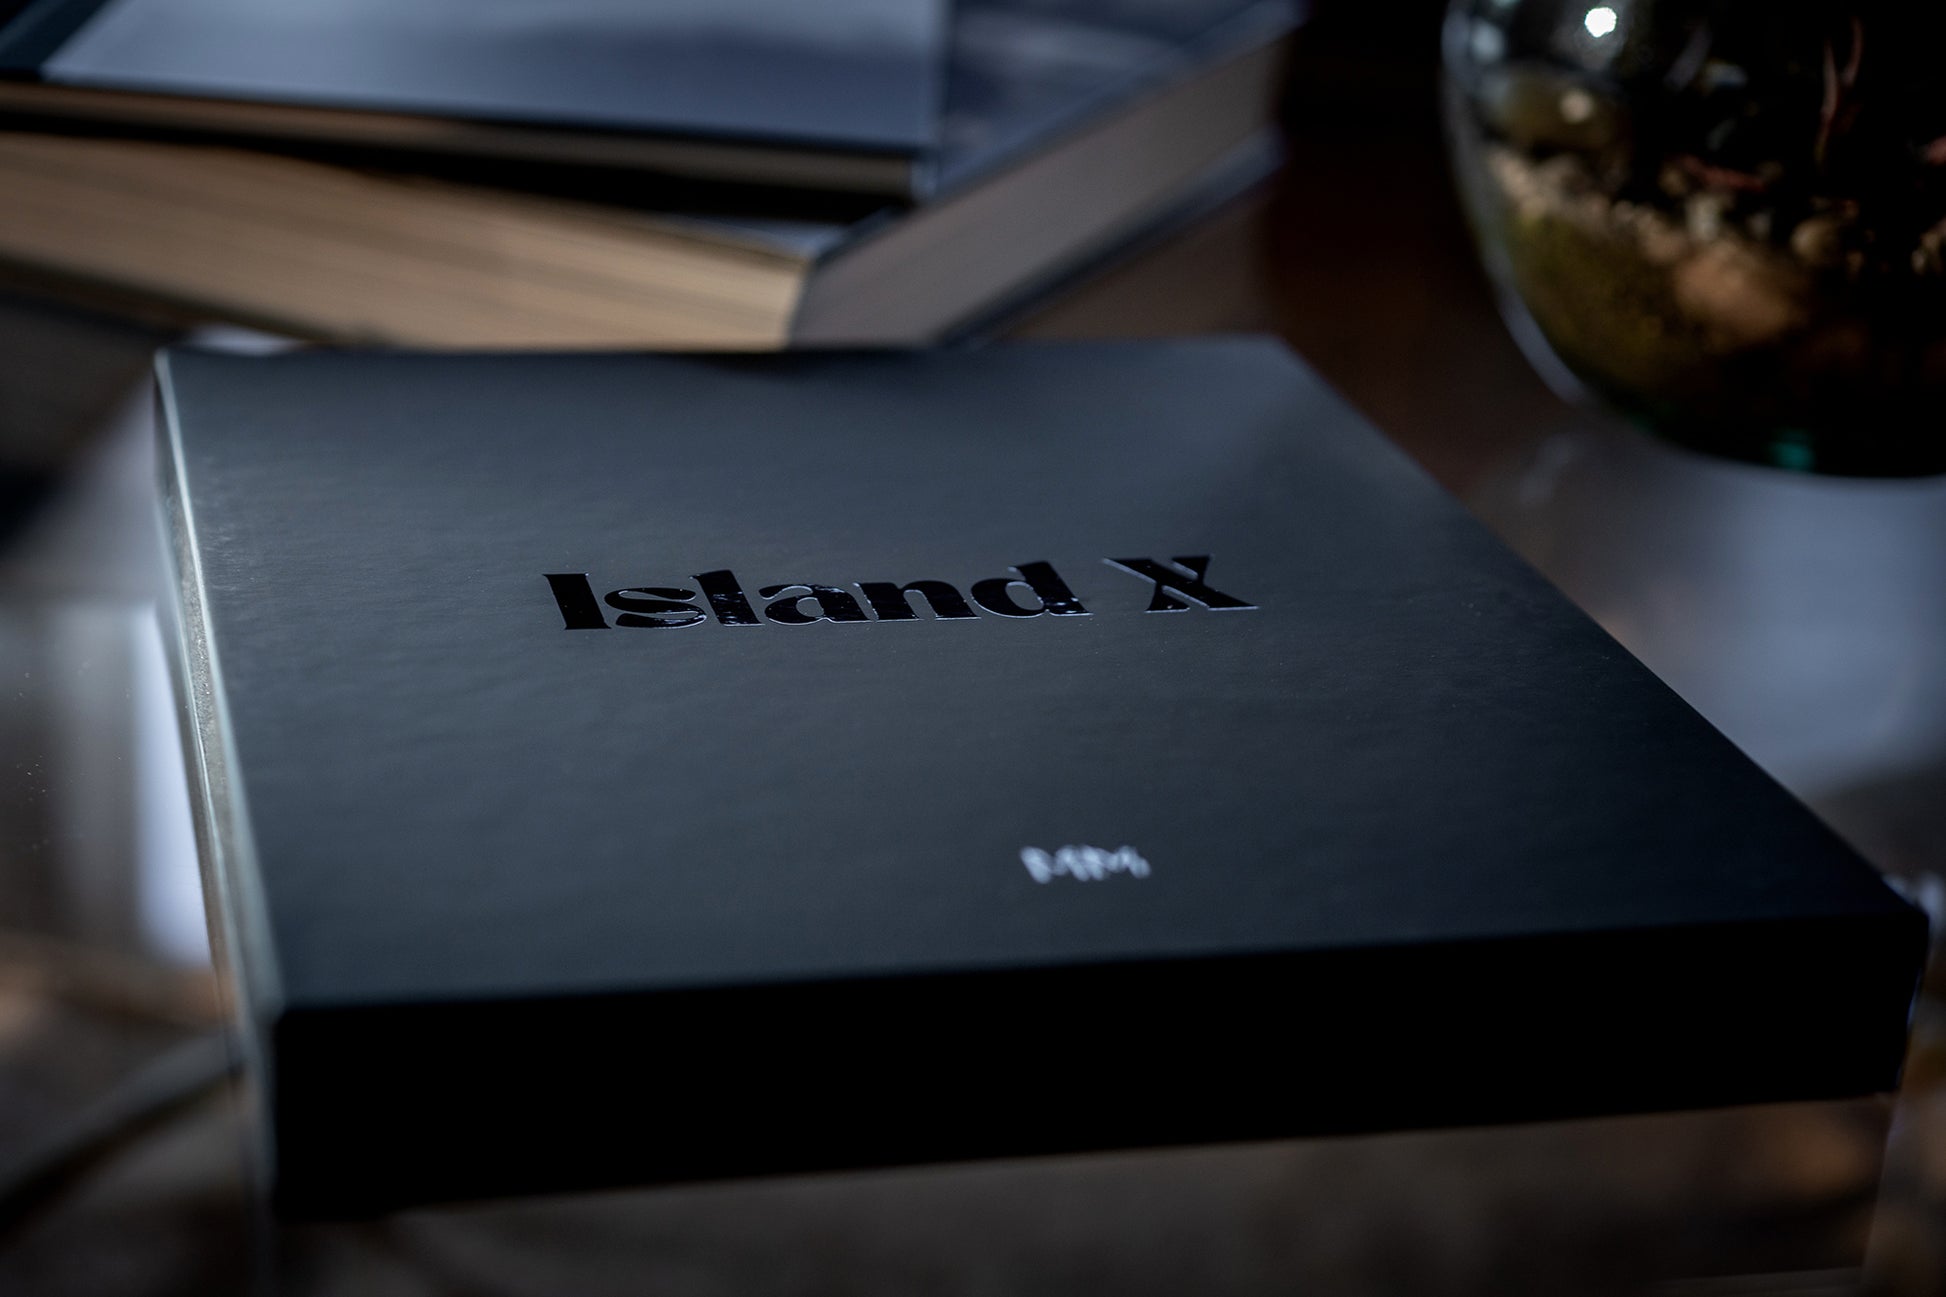 Island X- A photography book by Mark McInnis- Limited edition black slip case on a table.